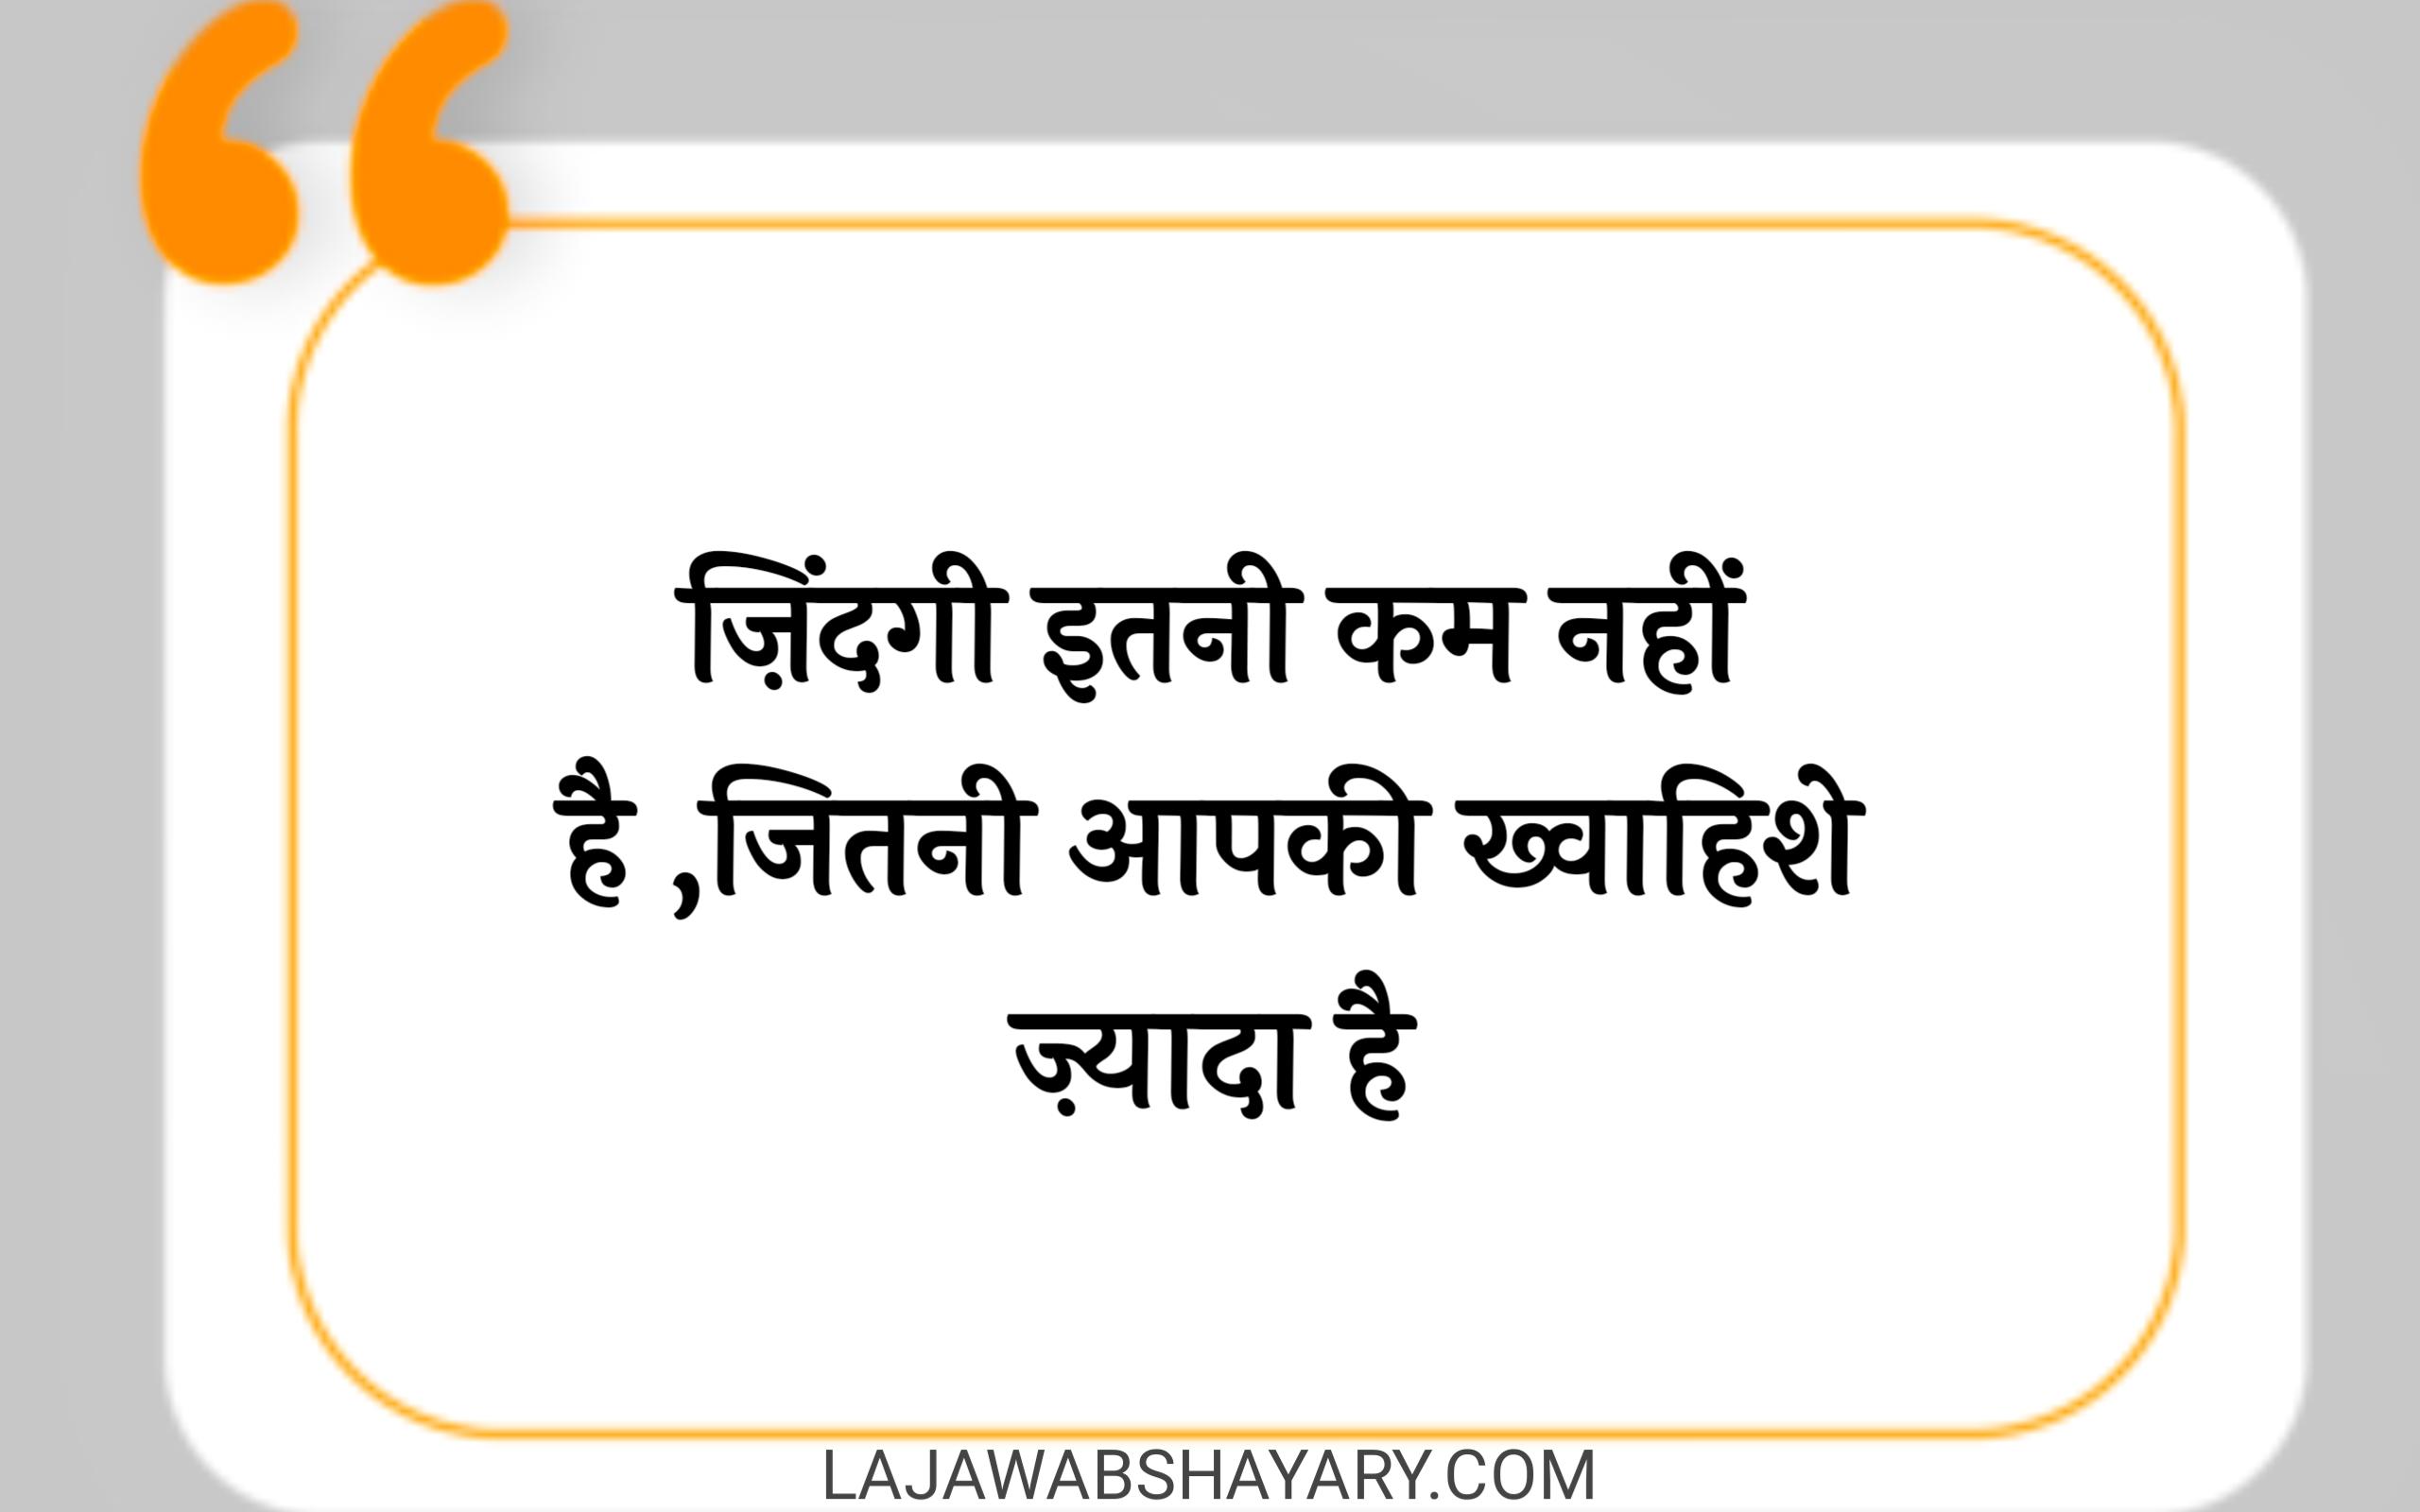 [100%New] 2 line quotes in Hindi | 2 लाइन कोट्स इन हिंदी,best 2 line quotes in hindi,2 line quotes in hindi attitude,2 line status in Hindi,2 line shayari in Hindi 